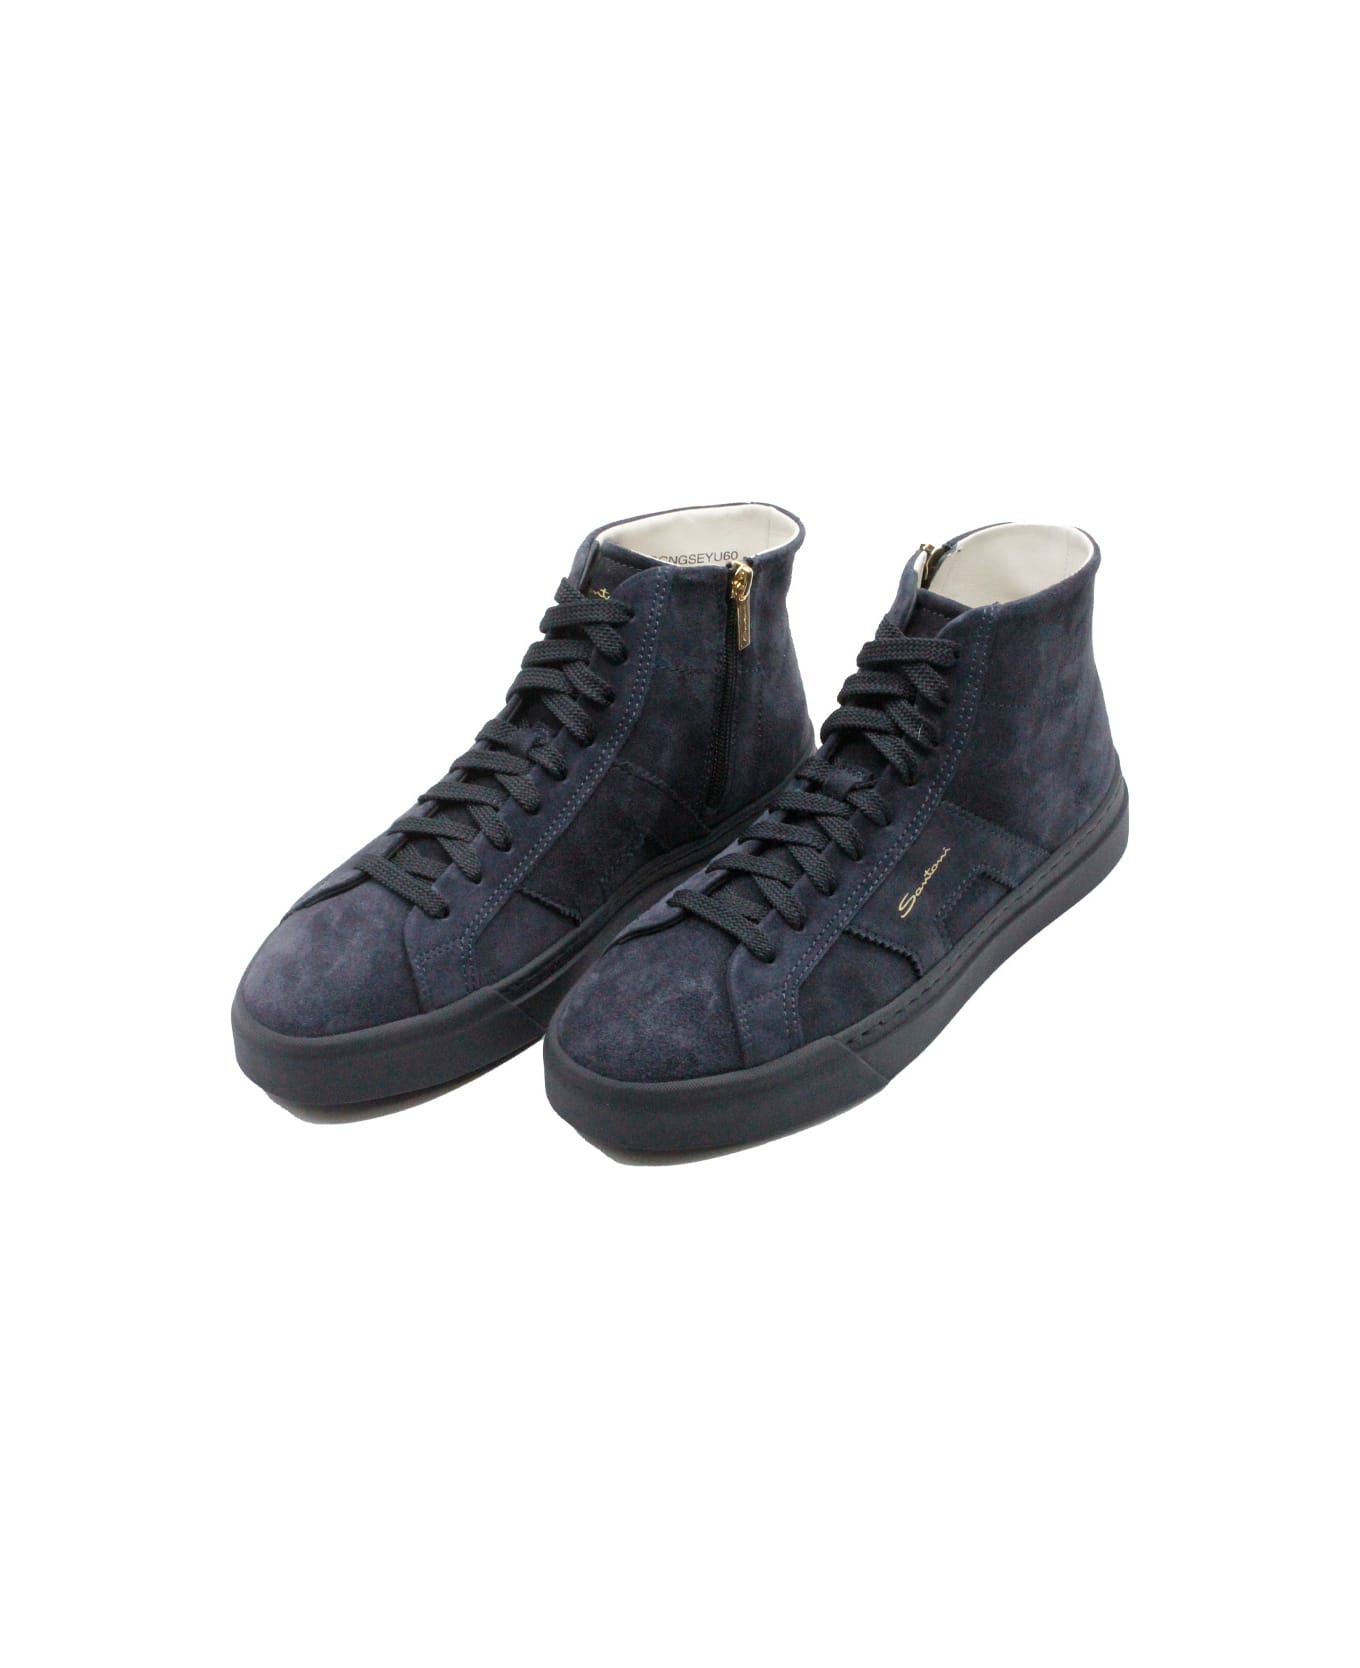 Santoni High-top Sneaker In Soft Suede Calfskin With Side Zip And Laces With Side Logo Lettering - Blu